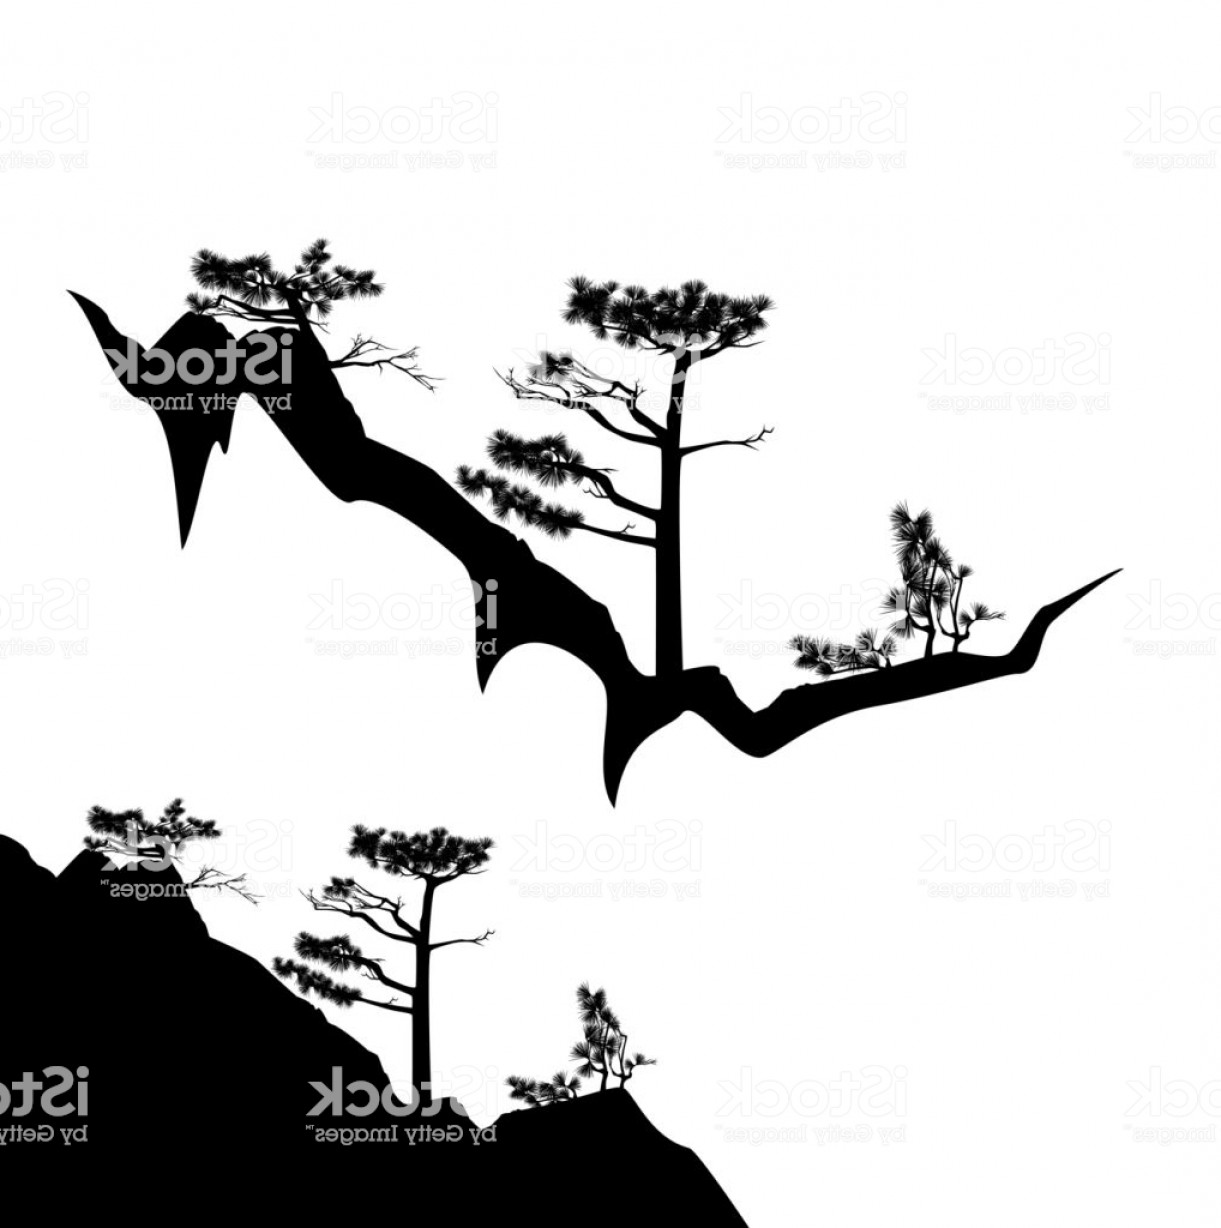 Download Tree Line Silhouette Vector at Vectorified.com ...